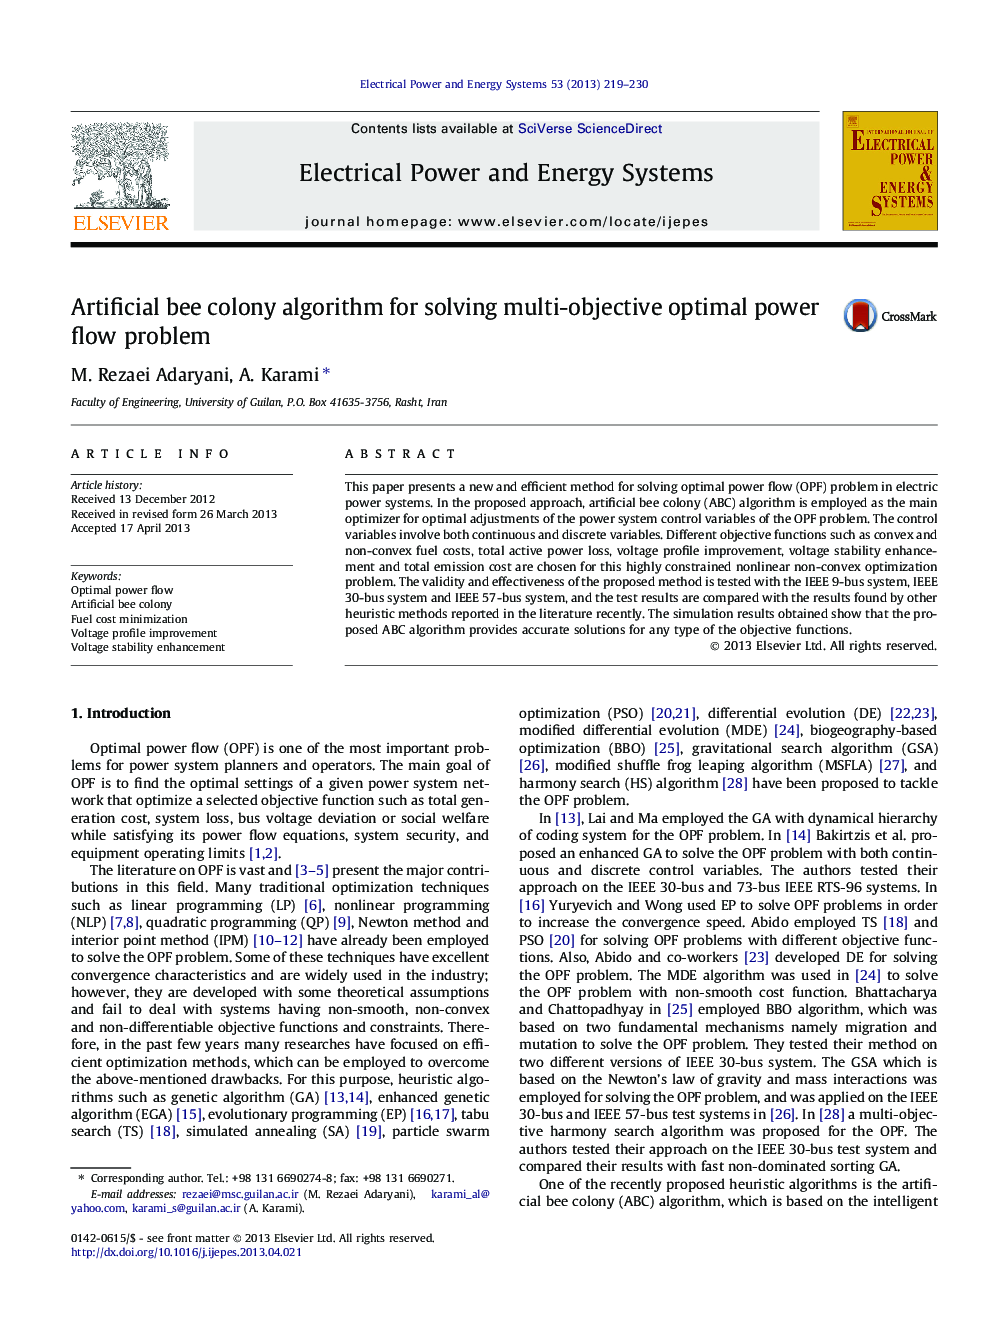 Artificial bee colony algorithm for solving multi-objective optimal power flow problem